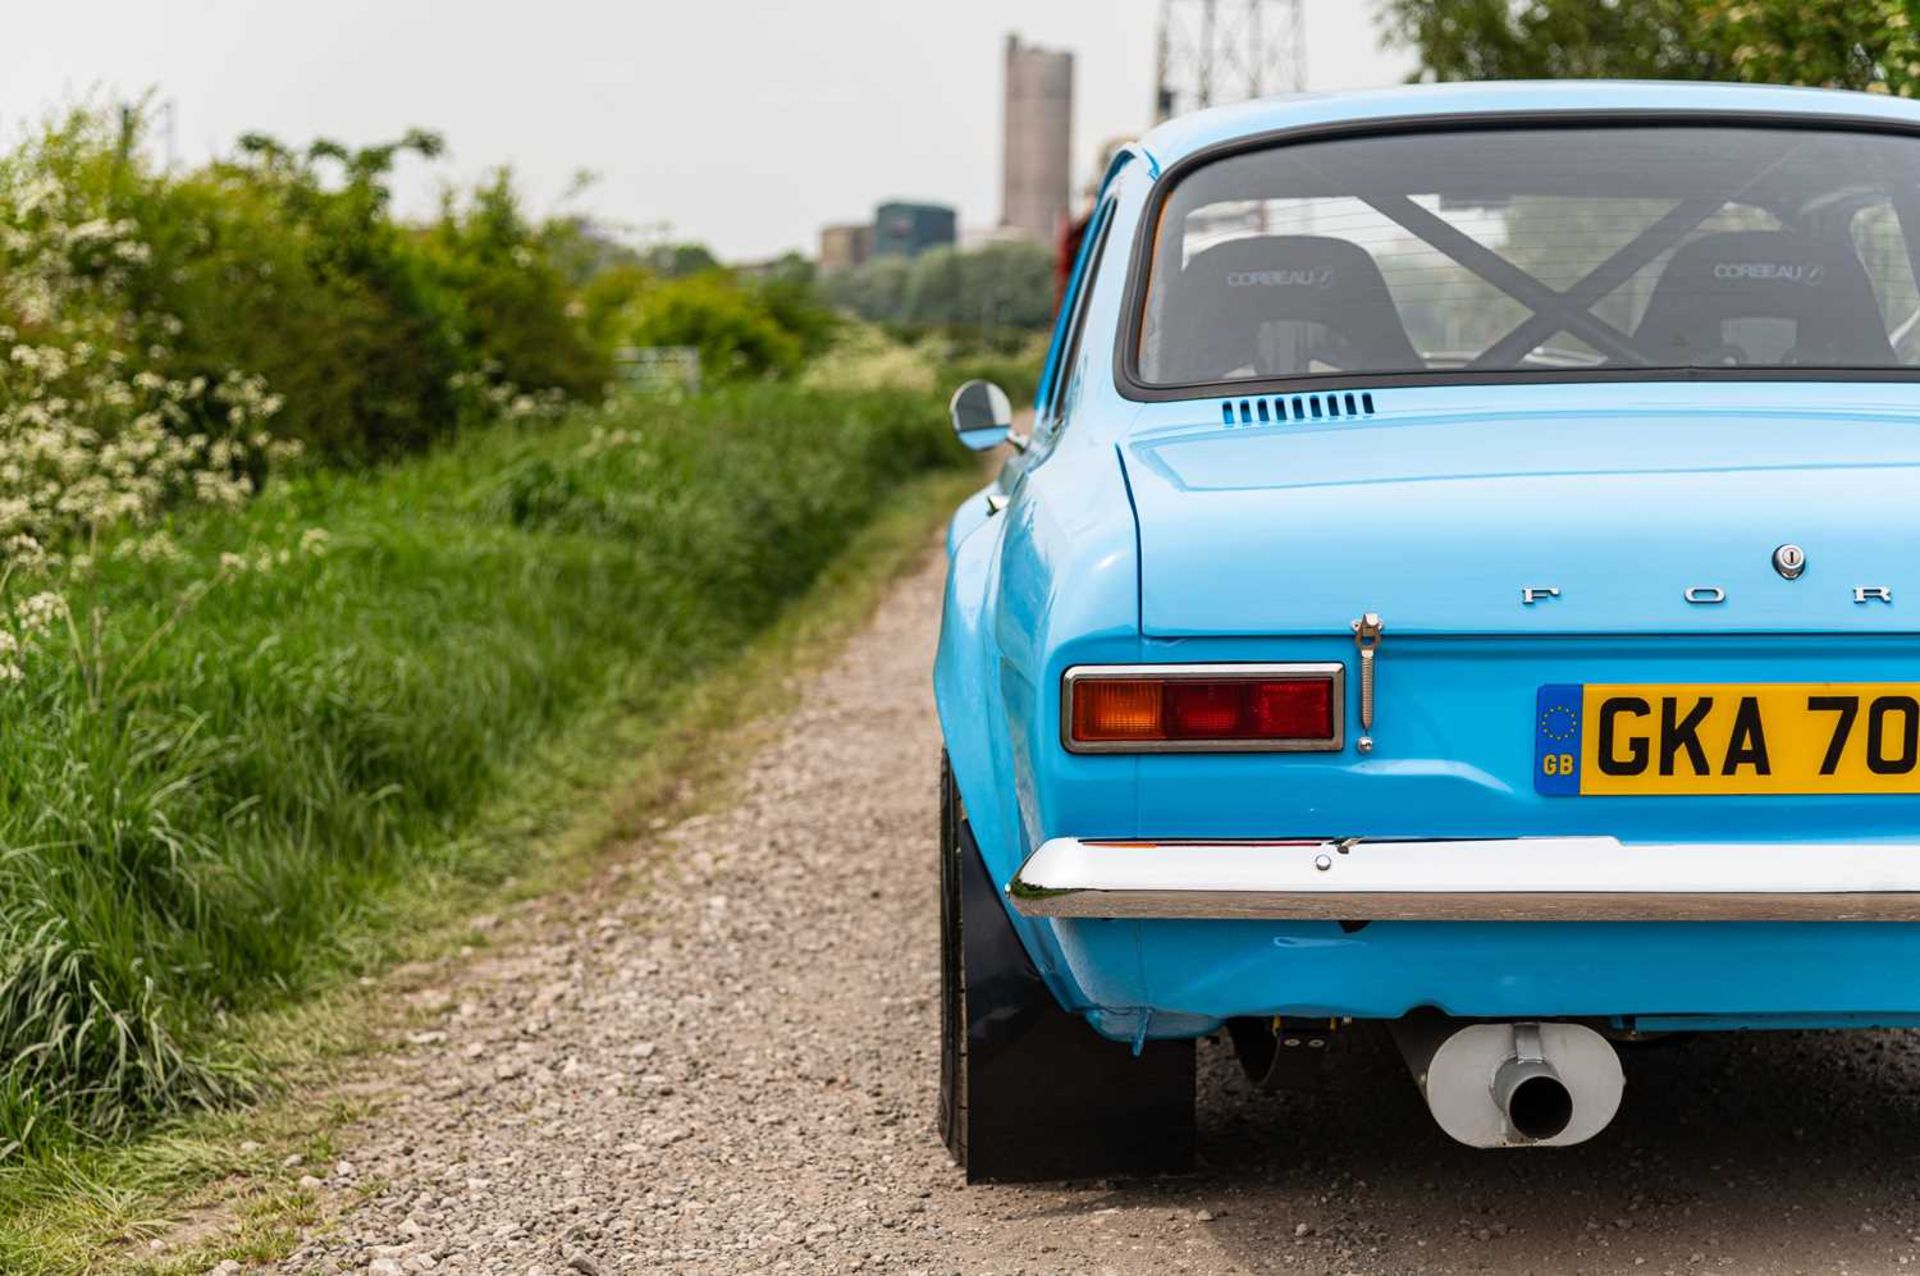 1973 Ford Escort RS1600 The ultimate no-expense-spared build to historic GP4 rally specification, fi - Image 27 of 84